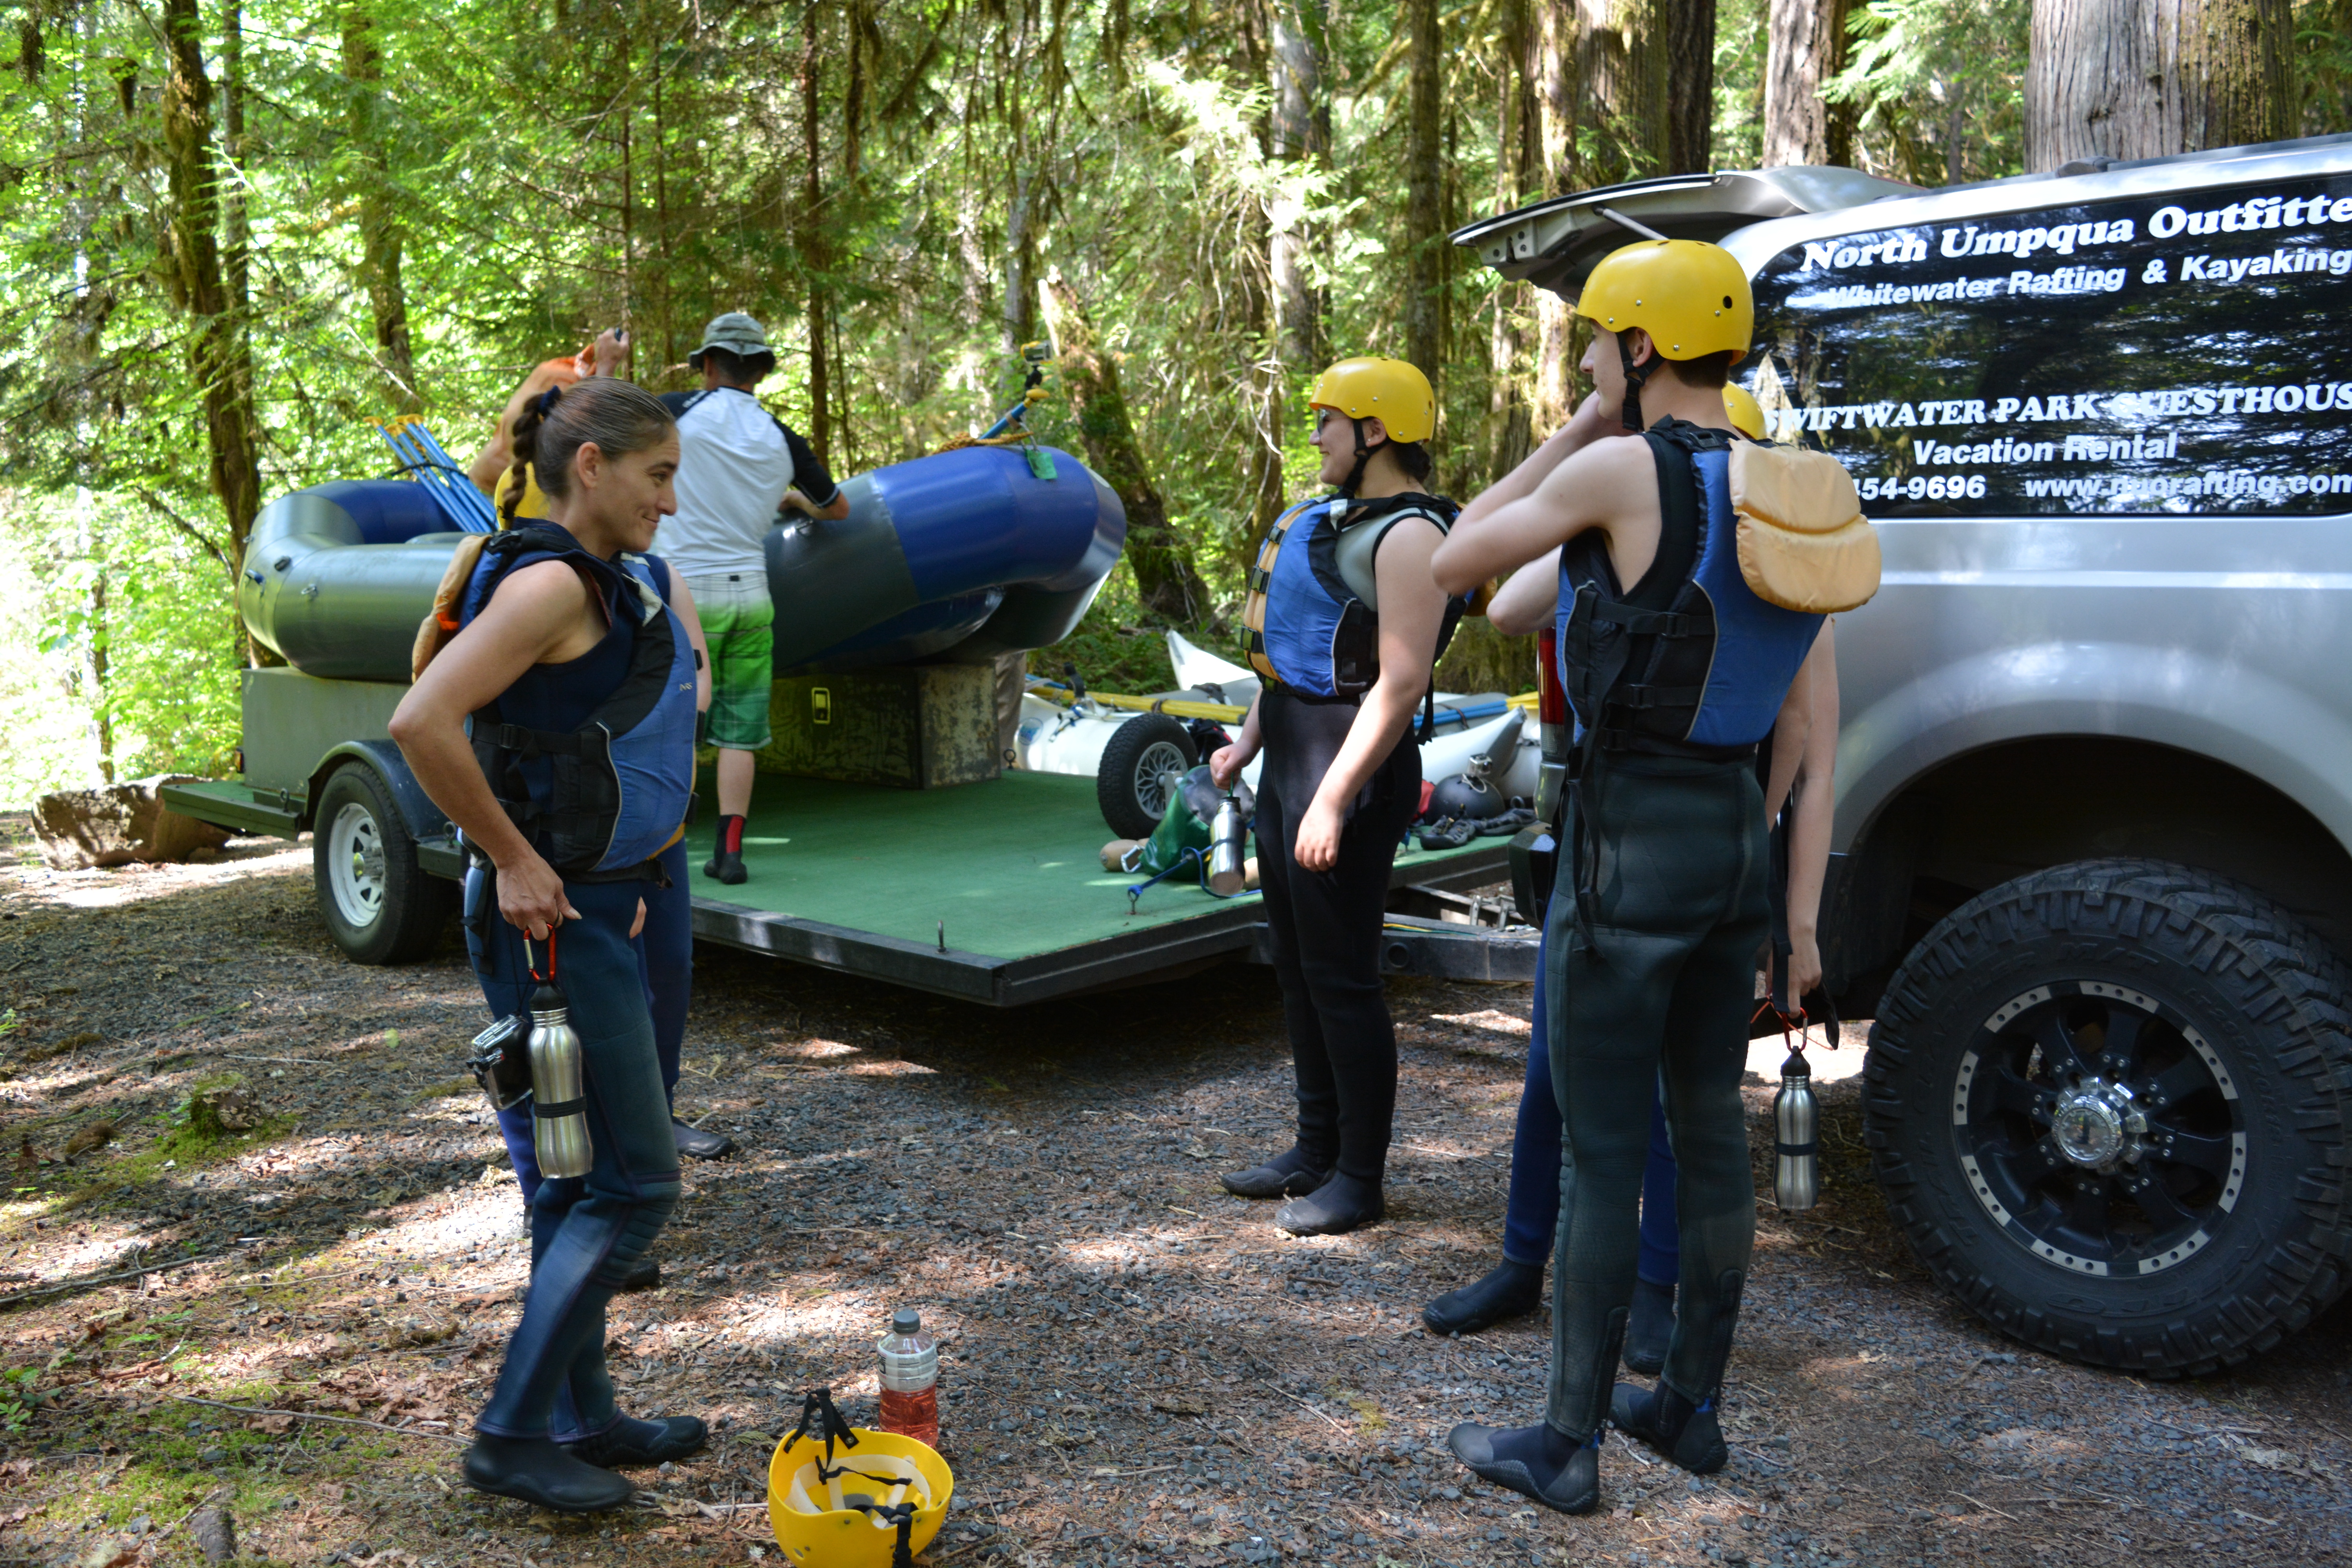 Wet suits provided At North Umpqua Outfitters